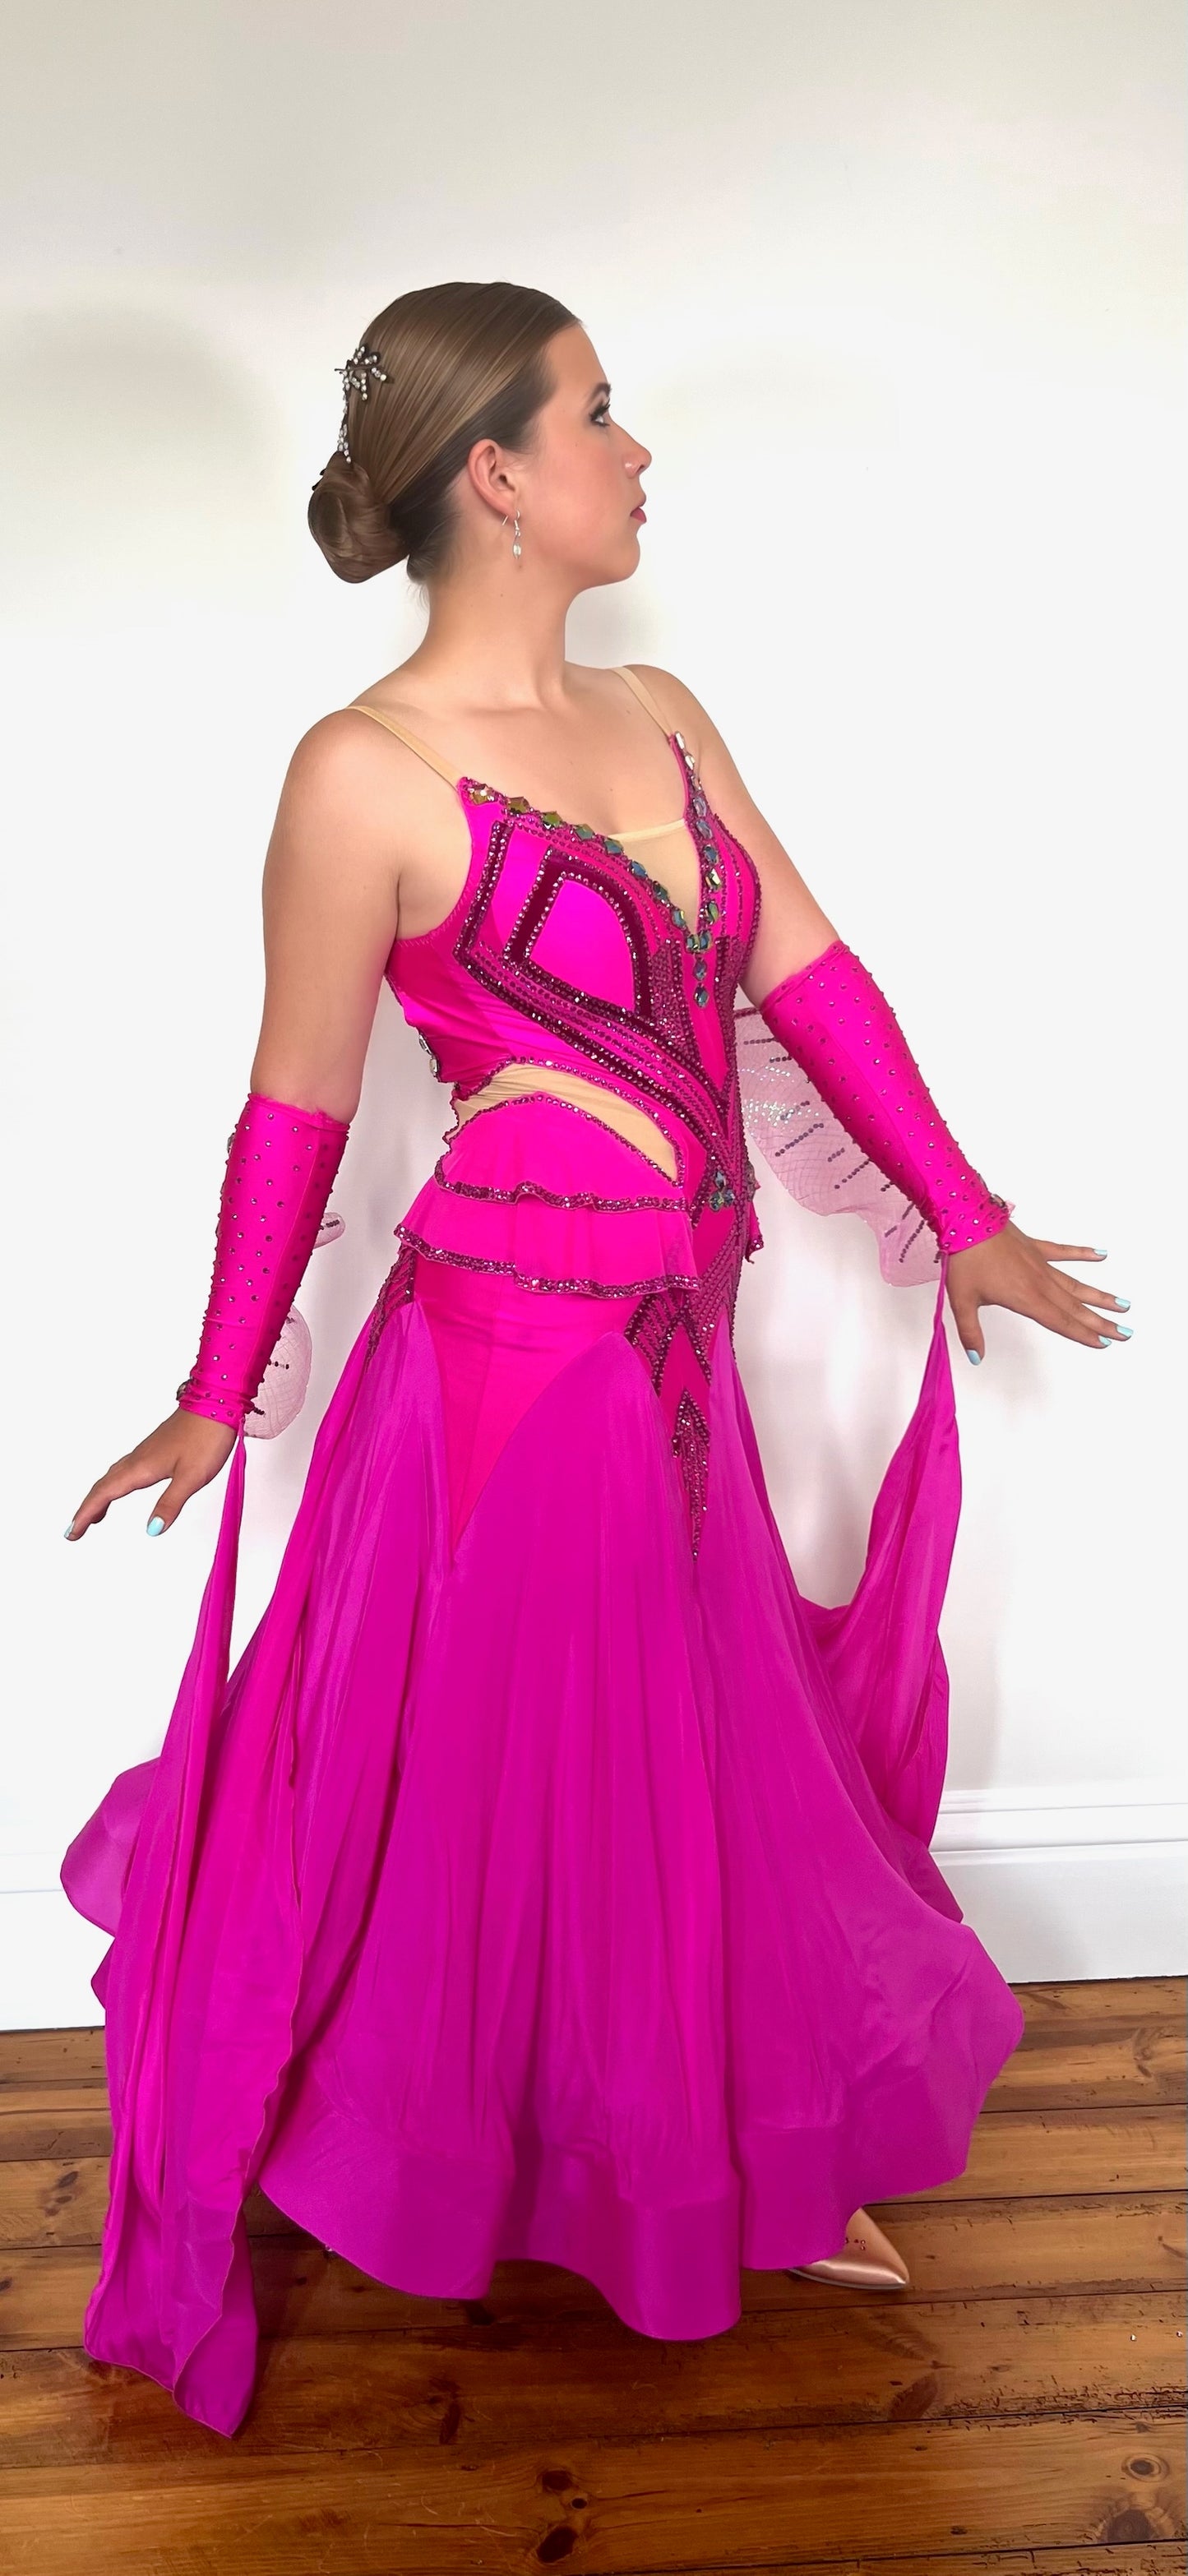 211 Magenta Pink Ballroom Dress. Flesh detailed panelling throughout bodice. Gloveless with organza detail & floats. Stoned in magenta